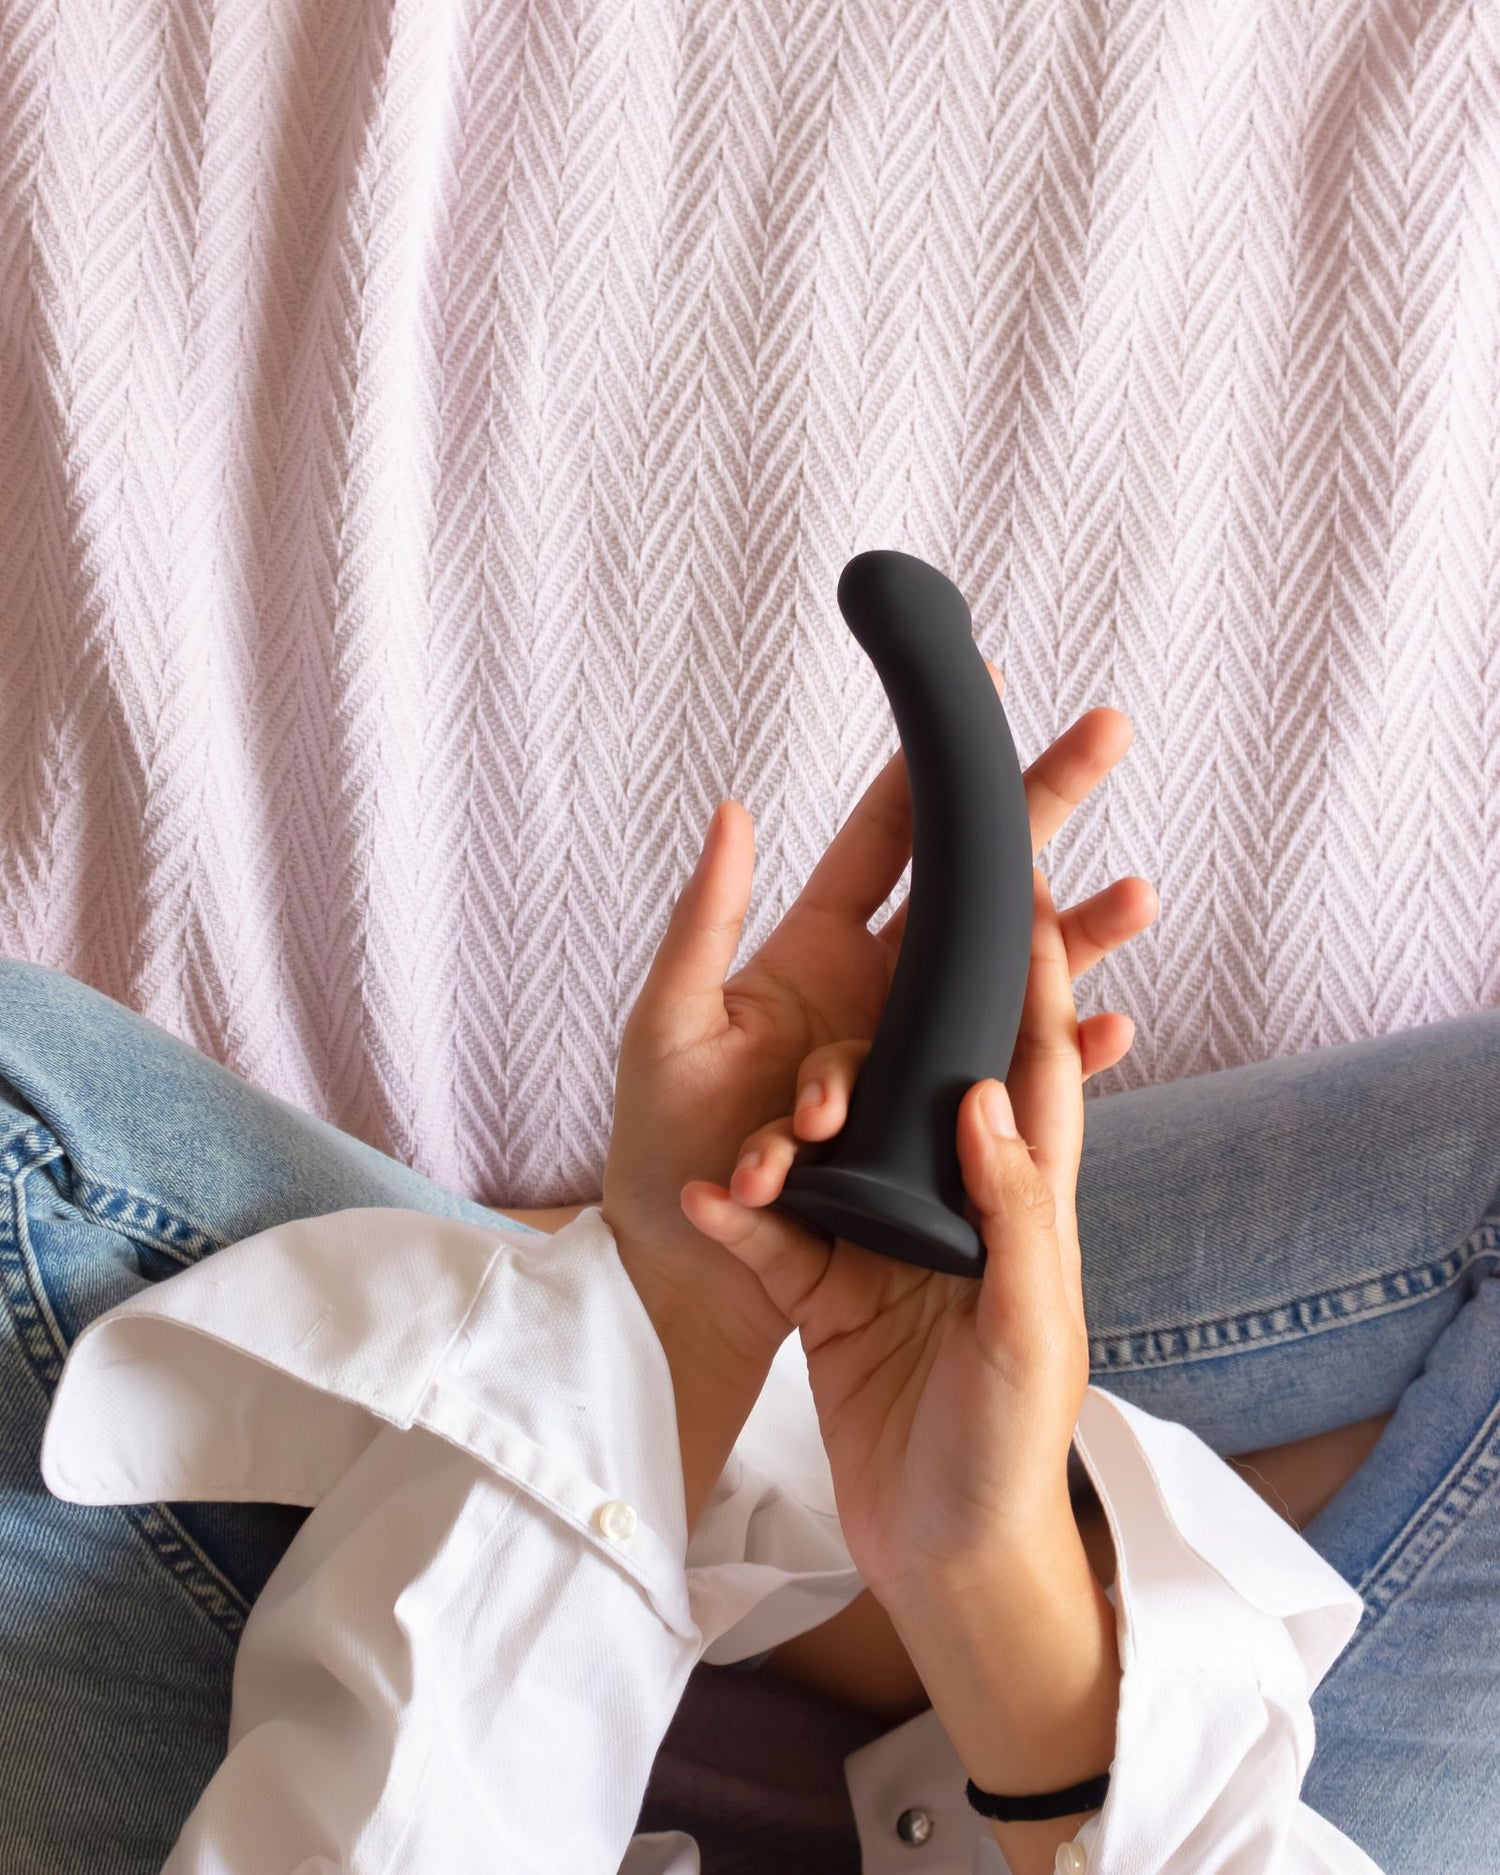 Elevating Handjobs, Fingering and Mutual Masturbation with Toys